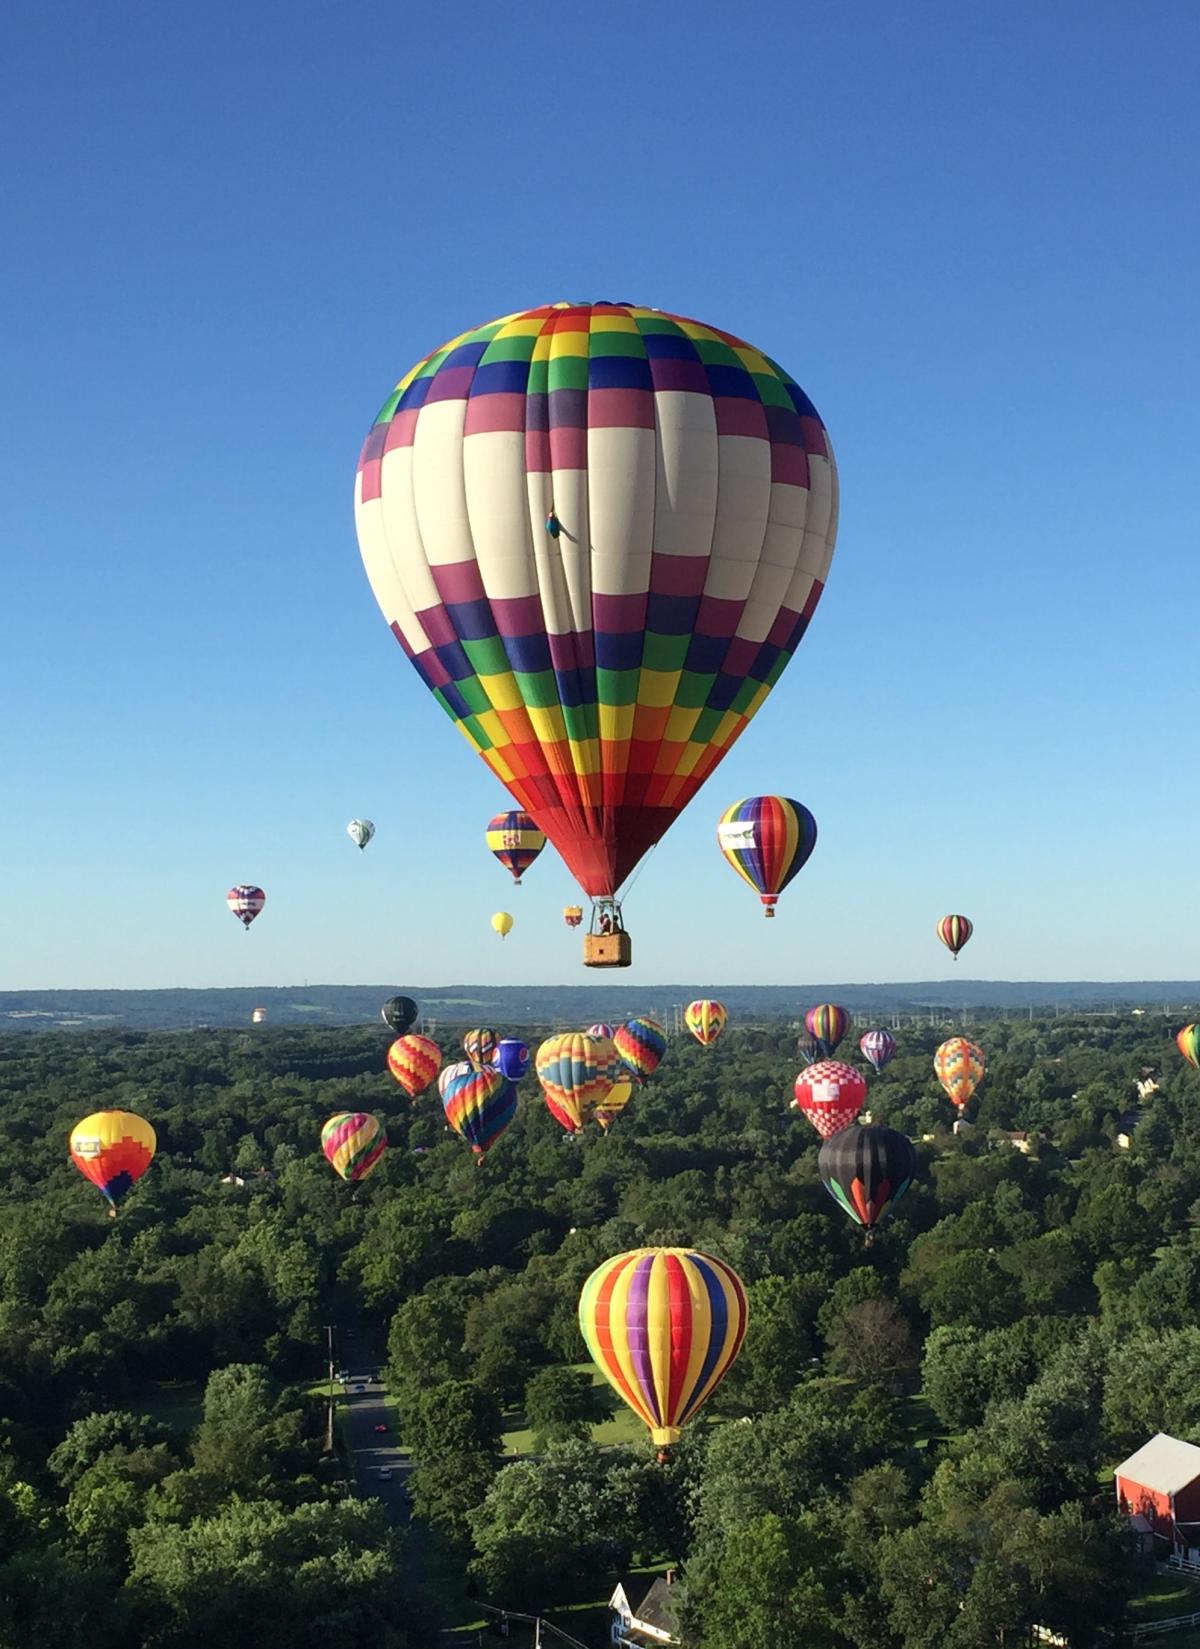 The 40th annual NJ balloon festival is July 2830. Here's what's new